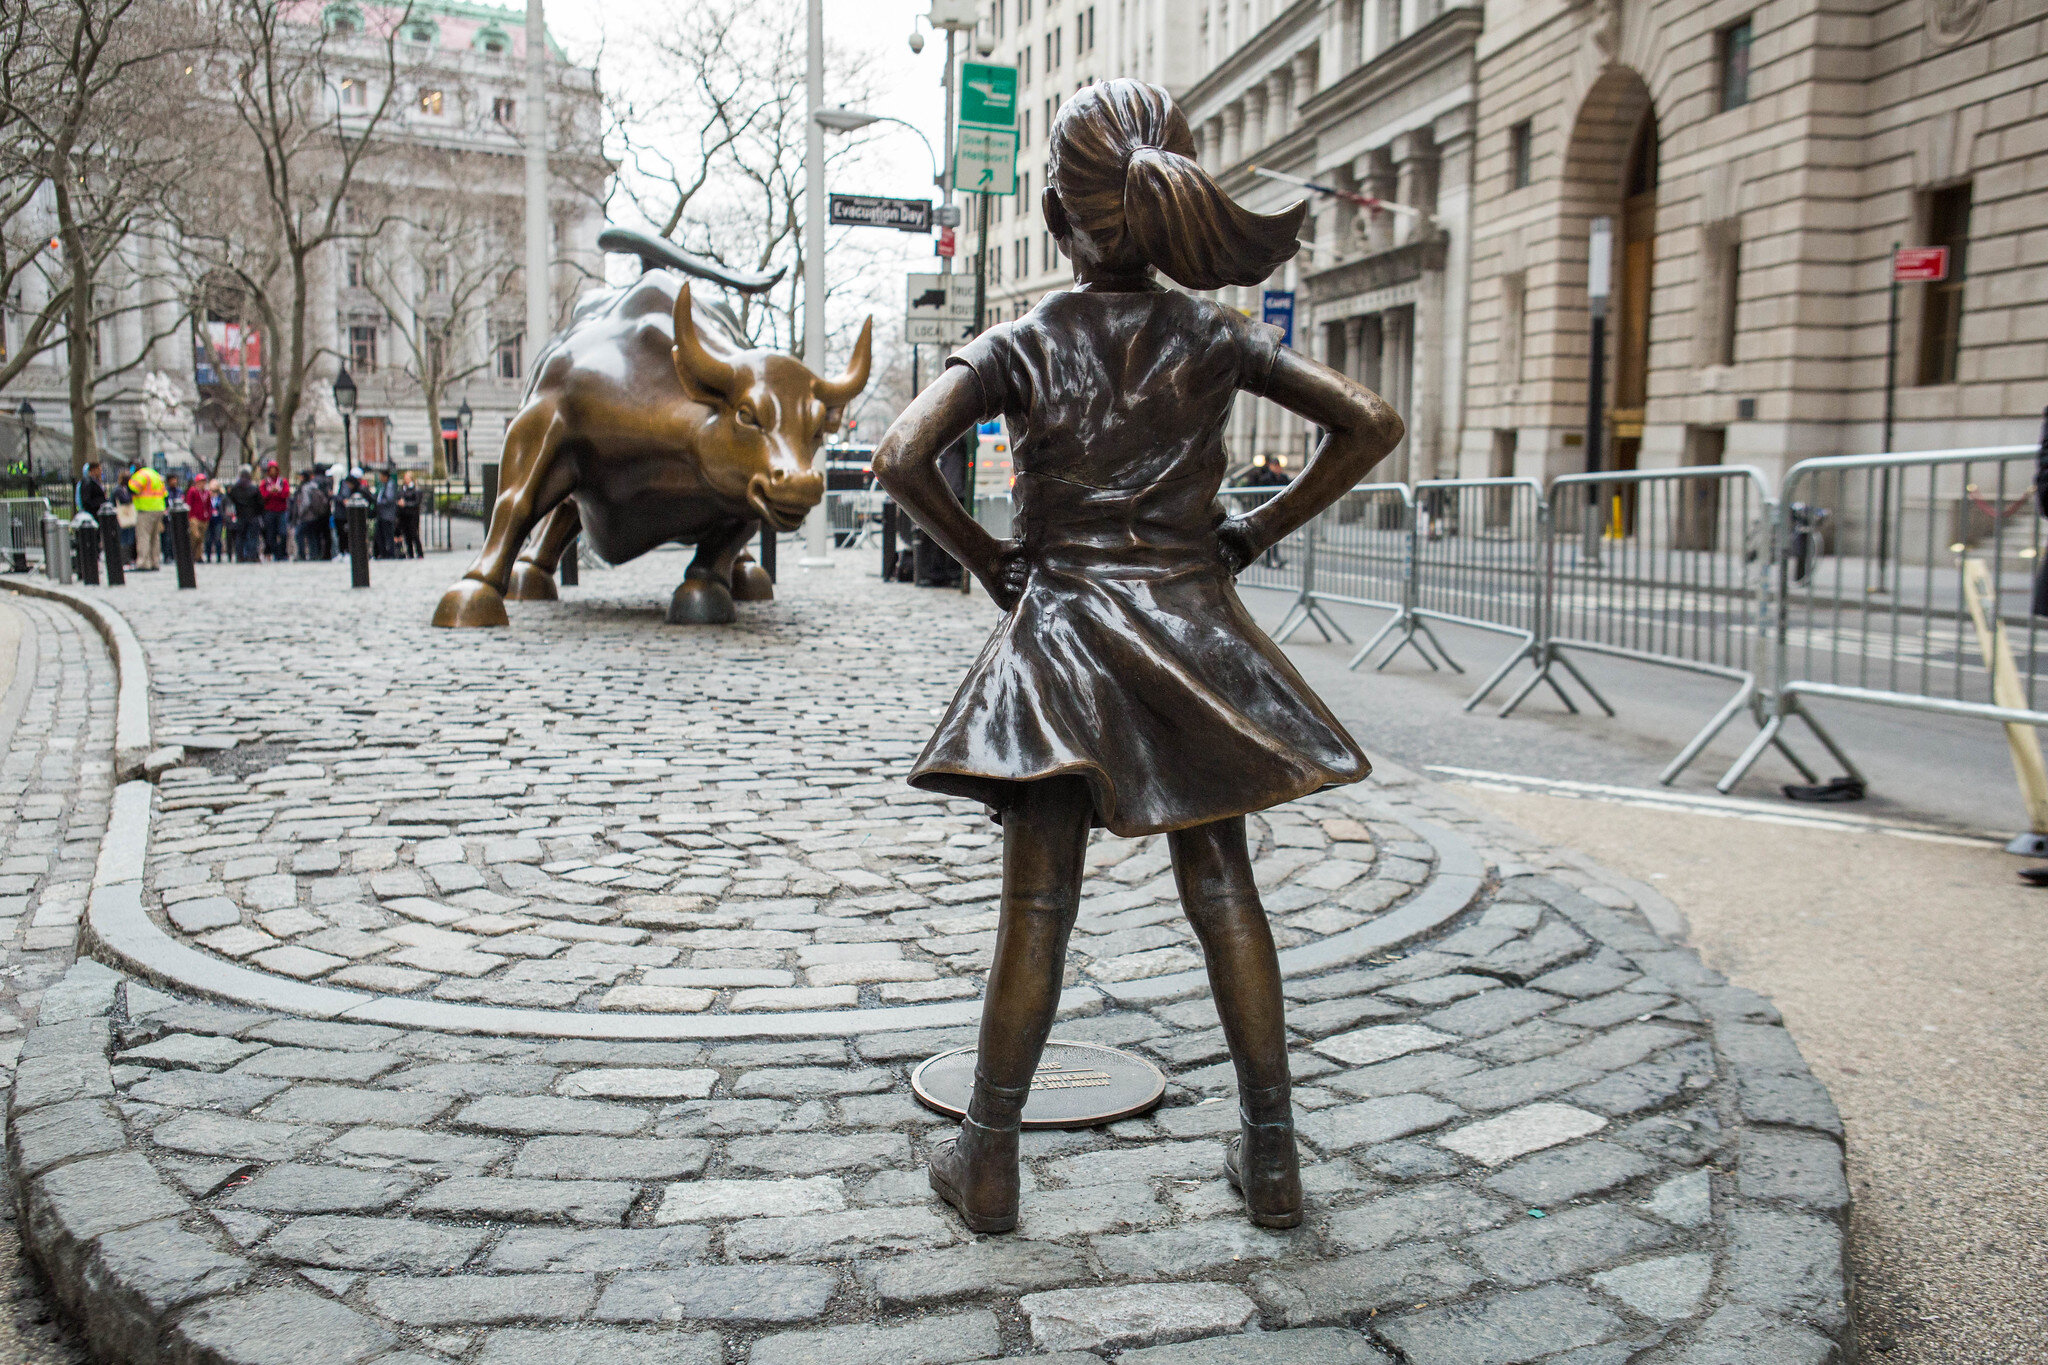 The ‘Fearless Girl’ statue by Kristen Visbal, Wall Street (NYC). (Anthony Quintano, Flickr)